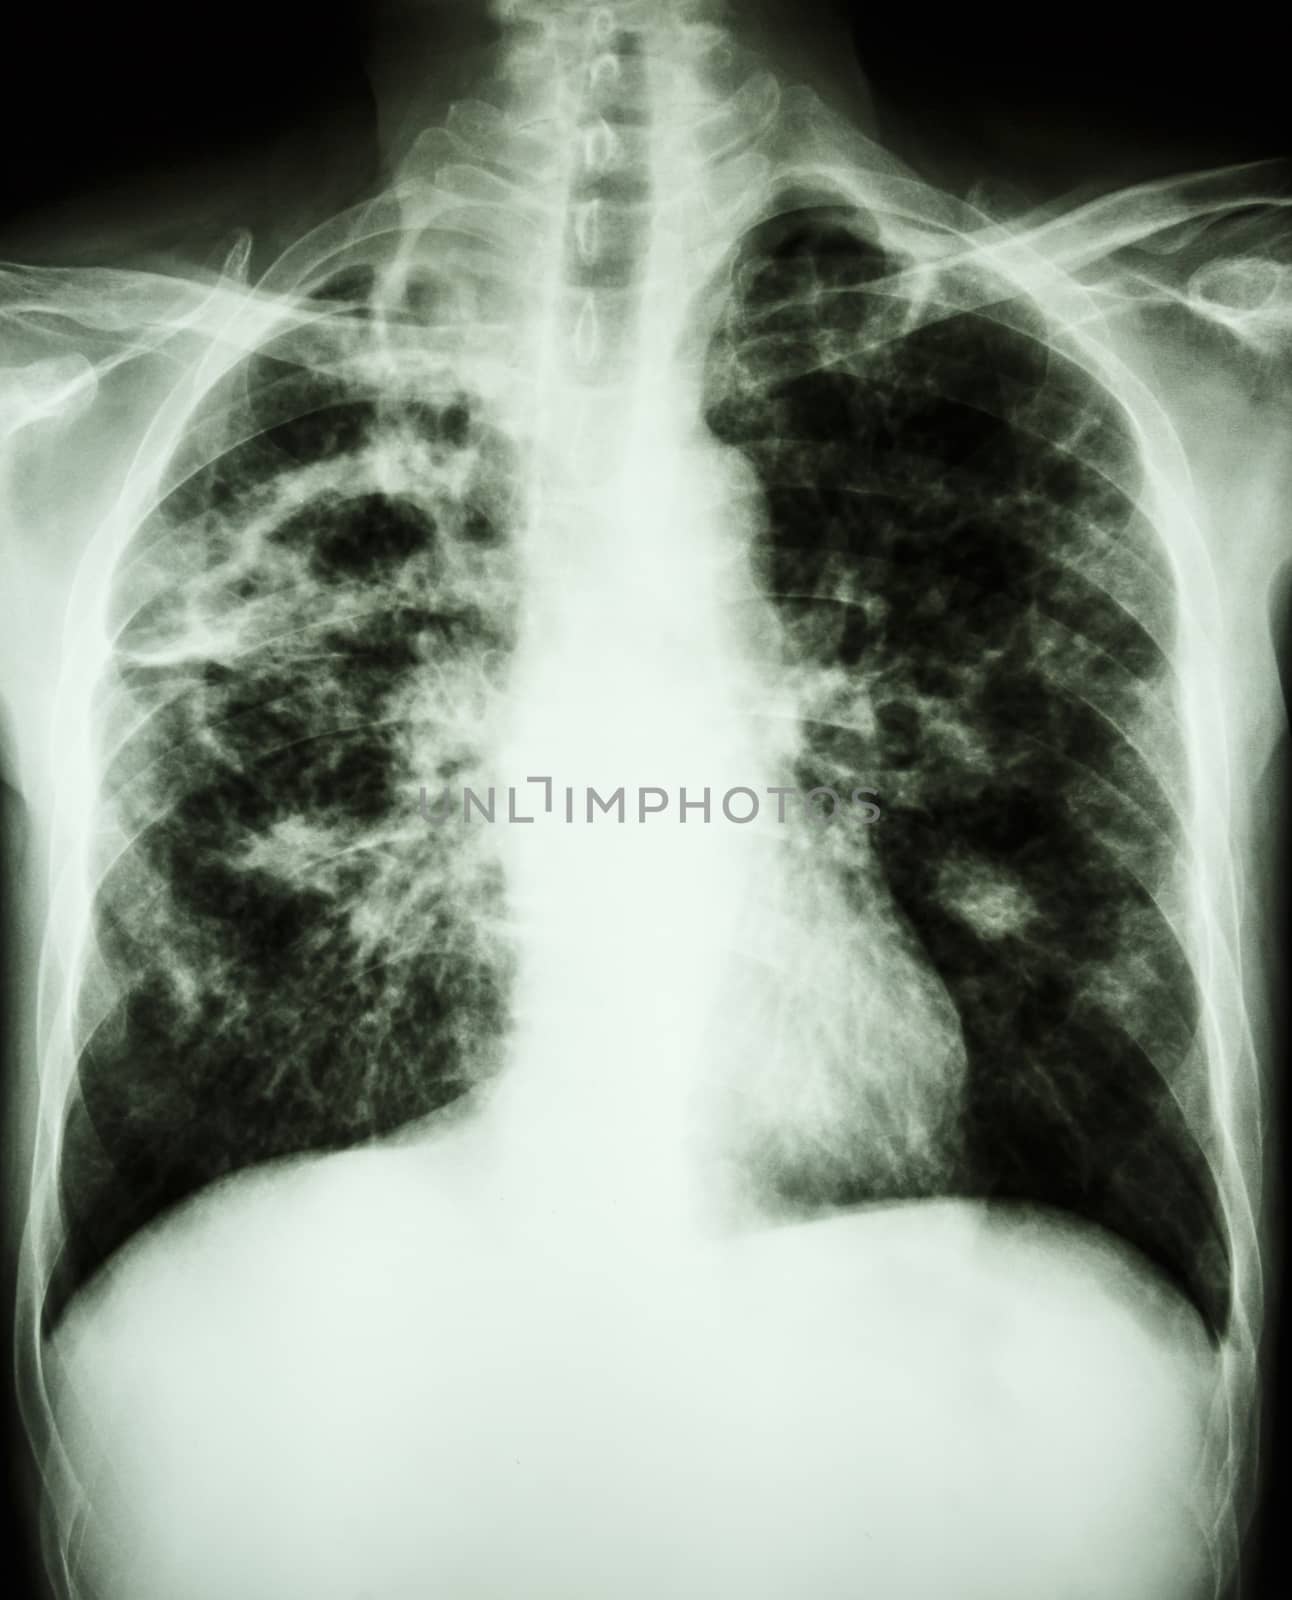 Mycobacterium tuberculosis infection (Pulmonary Tuberculosis) by stockdevil